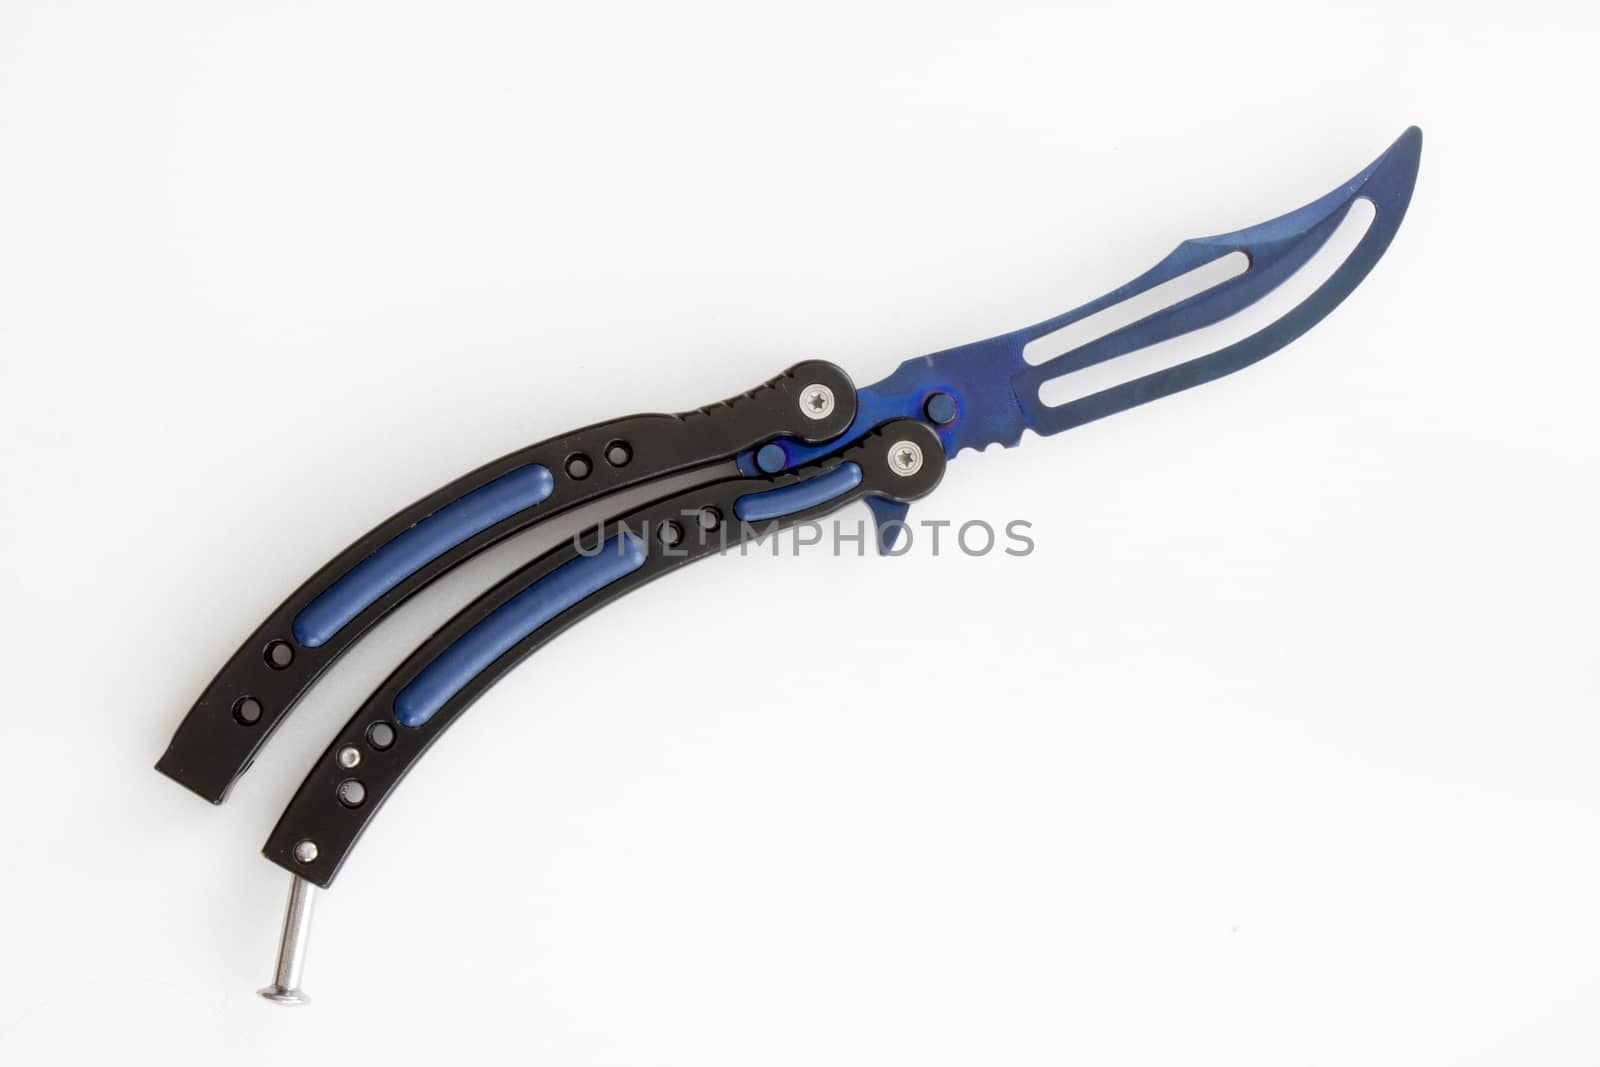 Butterfly knife blue steel with visible blade by bluiten